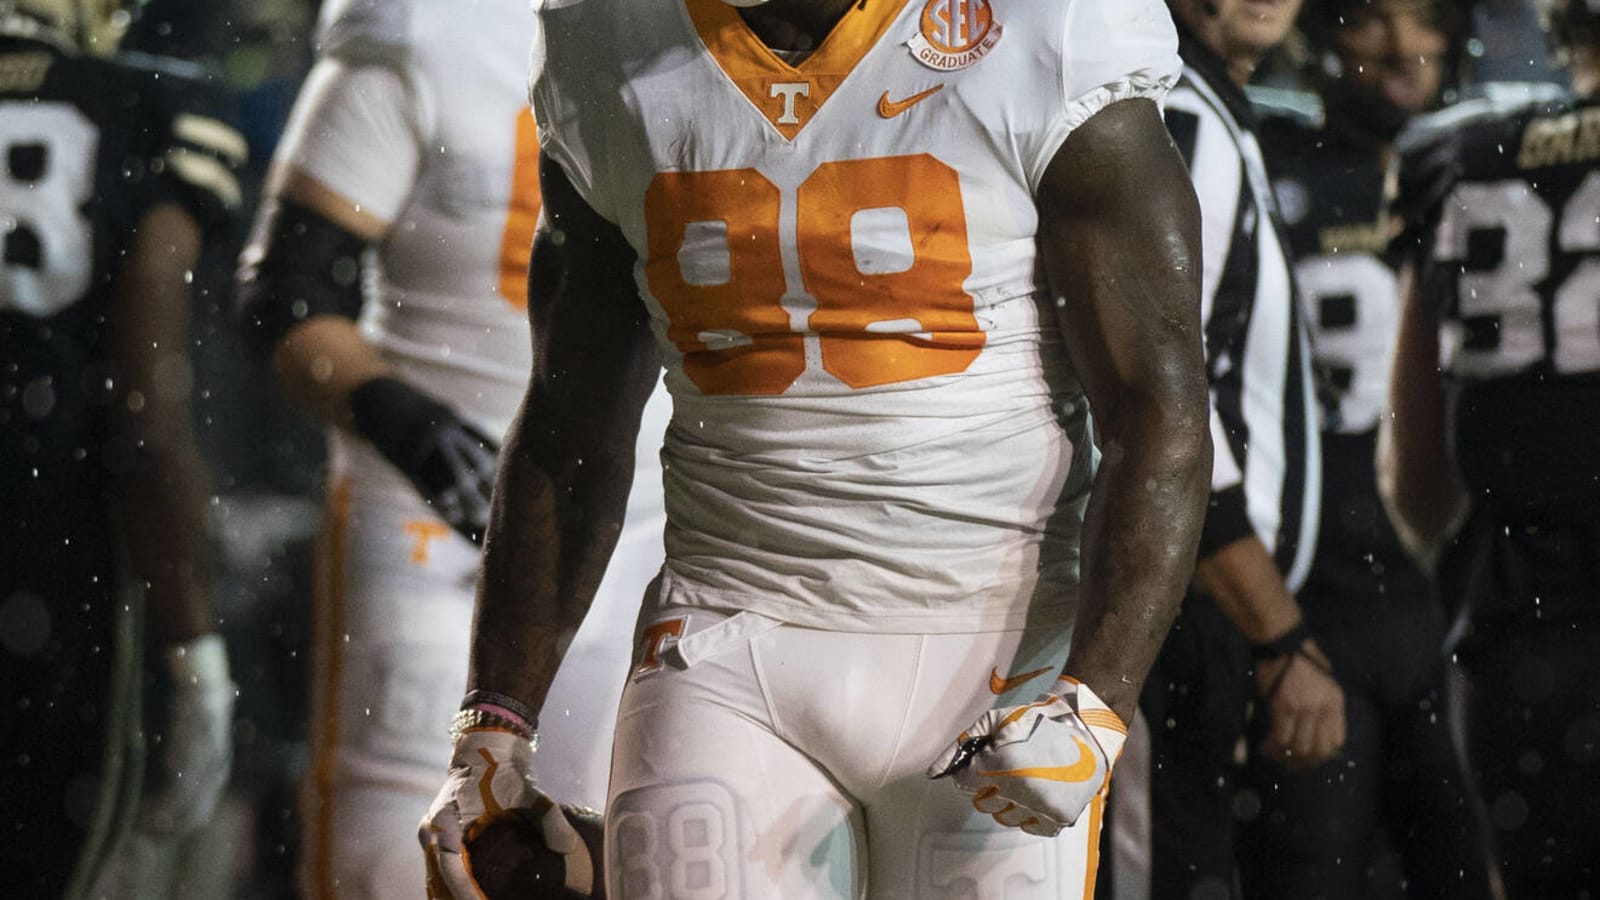 Former Tennessee Vols player set to make NFL debut after getting promoted from practice squad